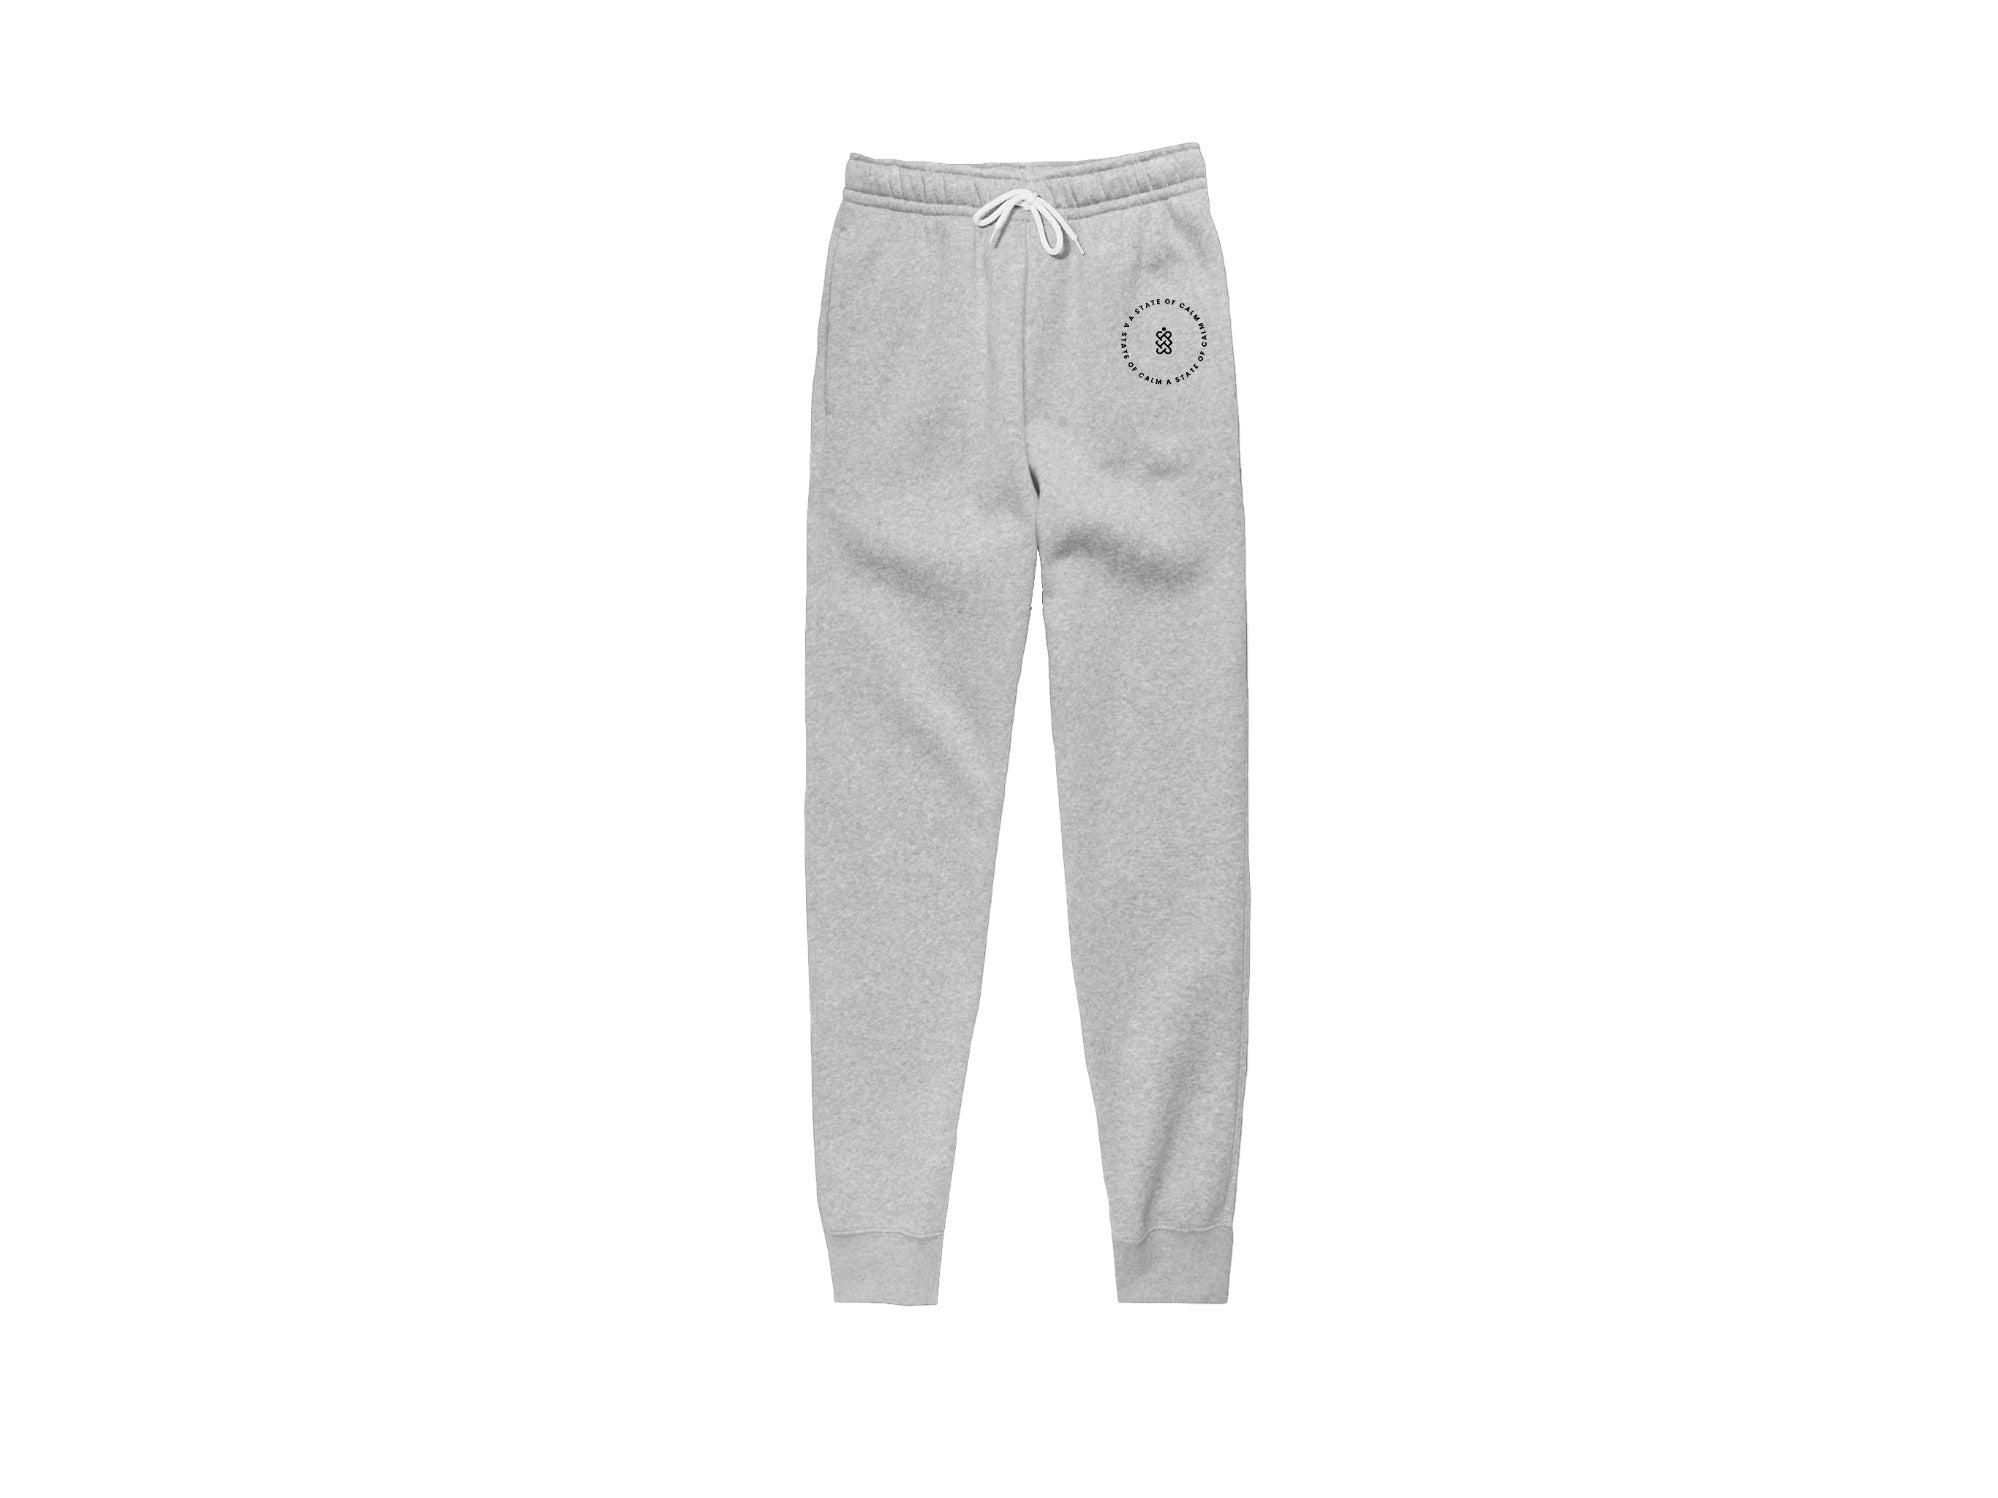 
  
  BLACK STATE OF CALM COZY JOGGER BOTTOMS Unisex
  
